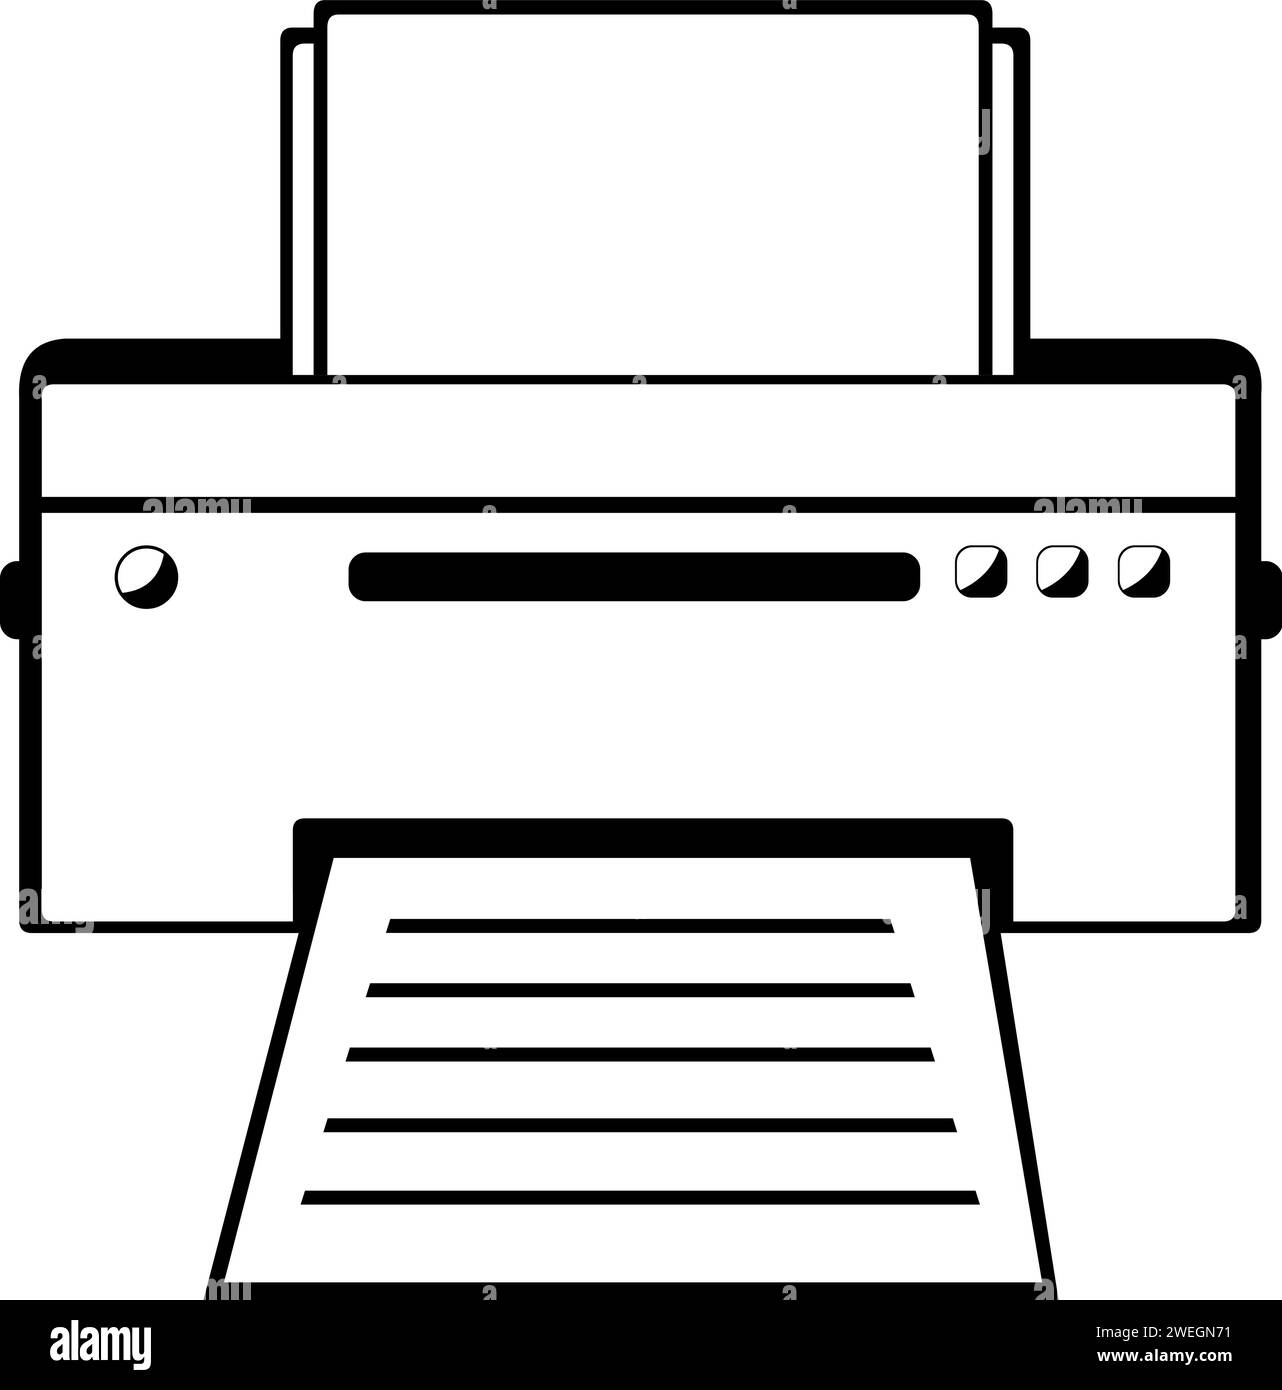 vector drawing illustration printer printing a paper sheet object, drawn in black and white Stock Vector